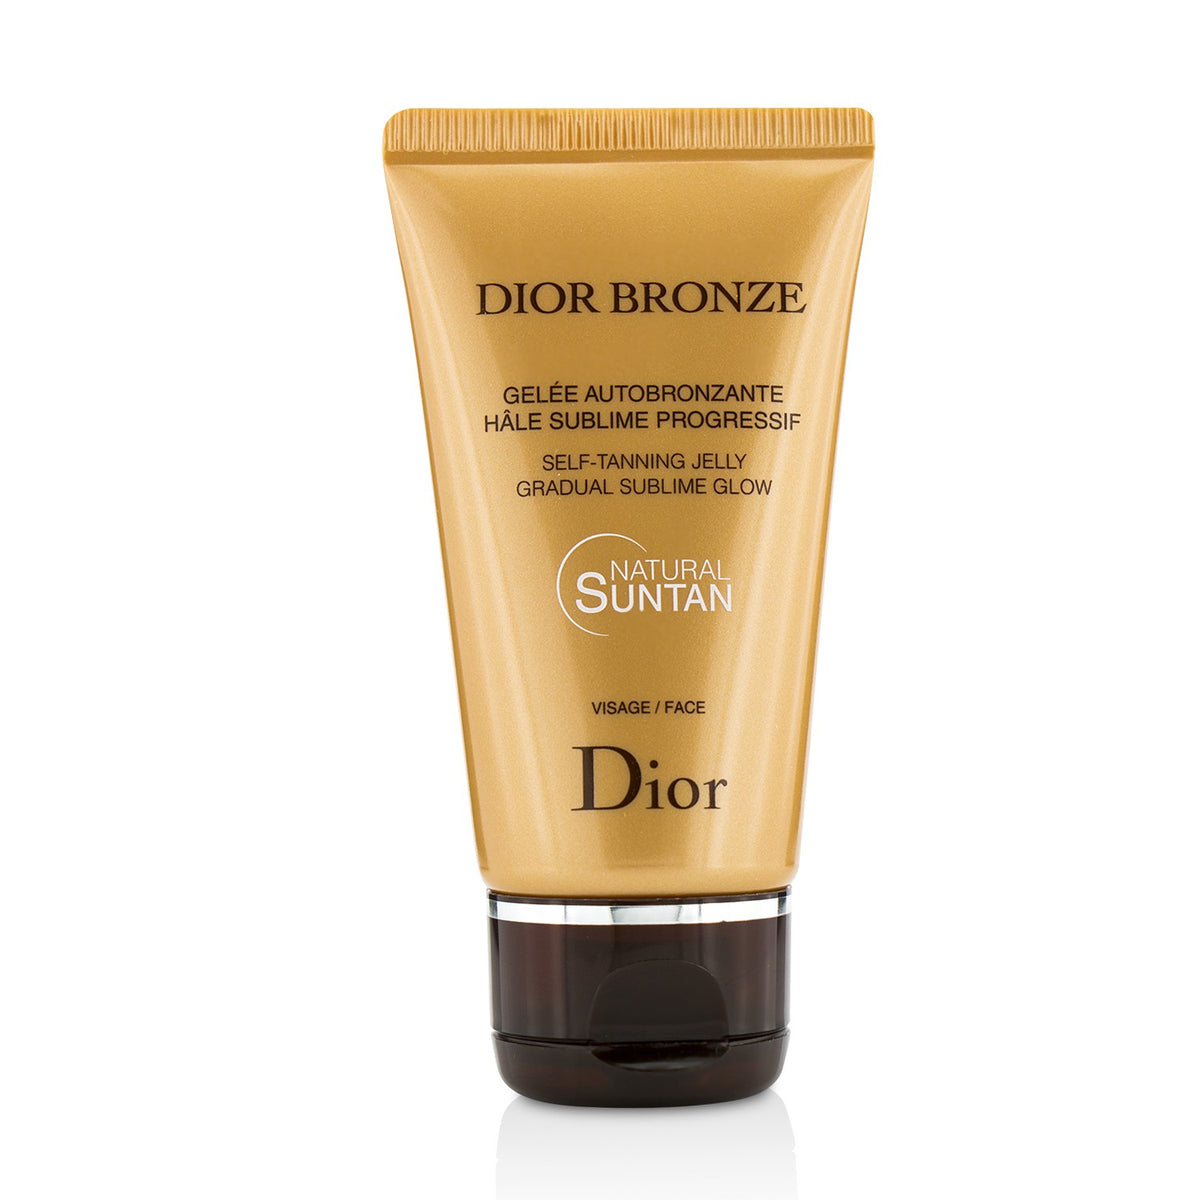 Dior Bronze Self-Tanning Jelly Gradual Sublime Face Sale | Christian Dior, Buy Now – Author